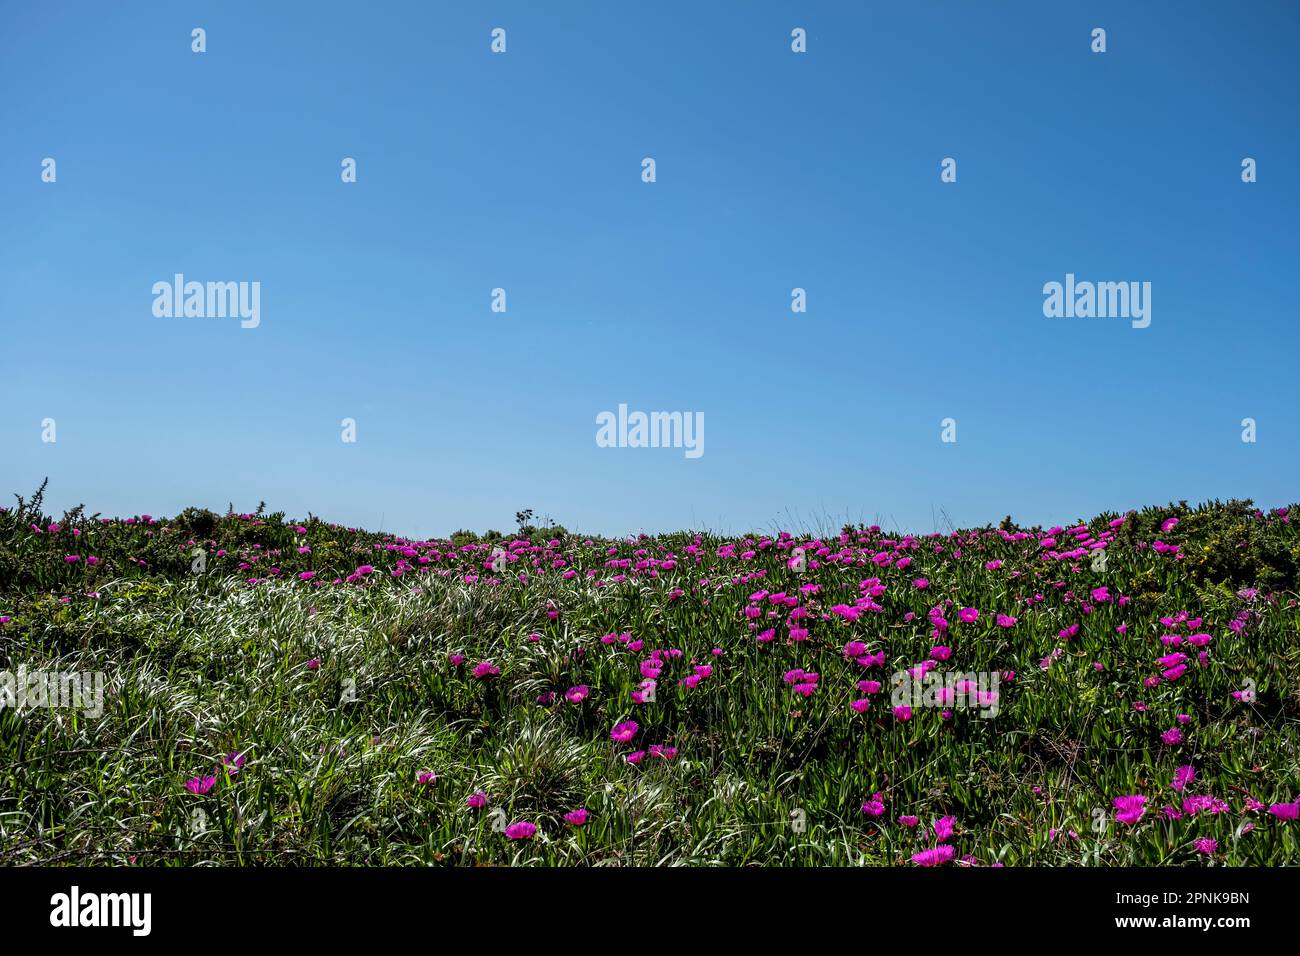 Highway ice plant deep pink blooming flowers covering a green meadow, blue sky background Stock Photo